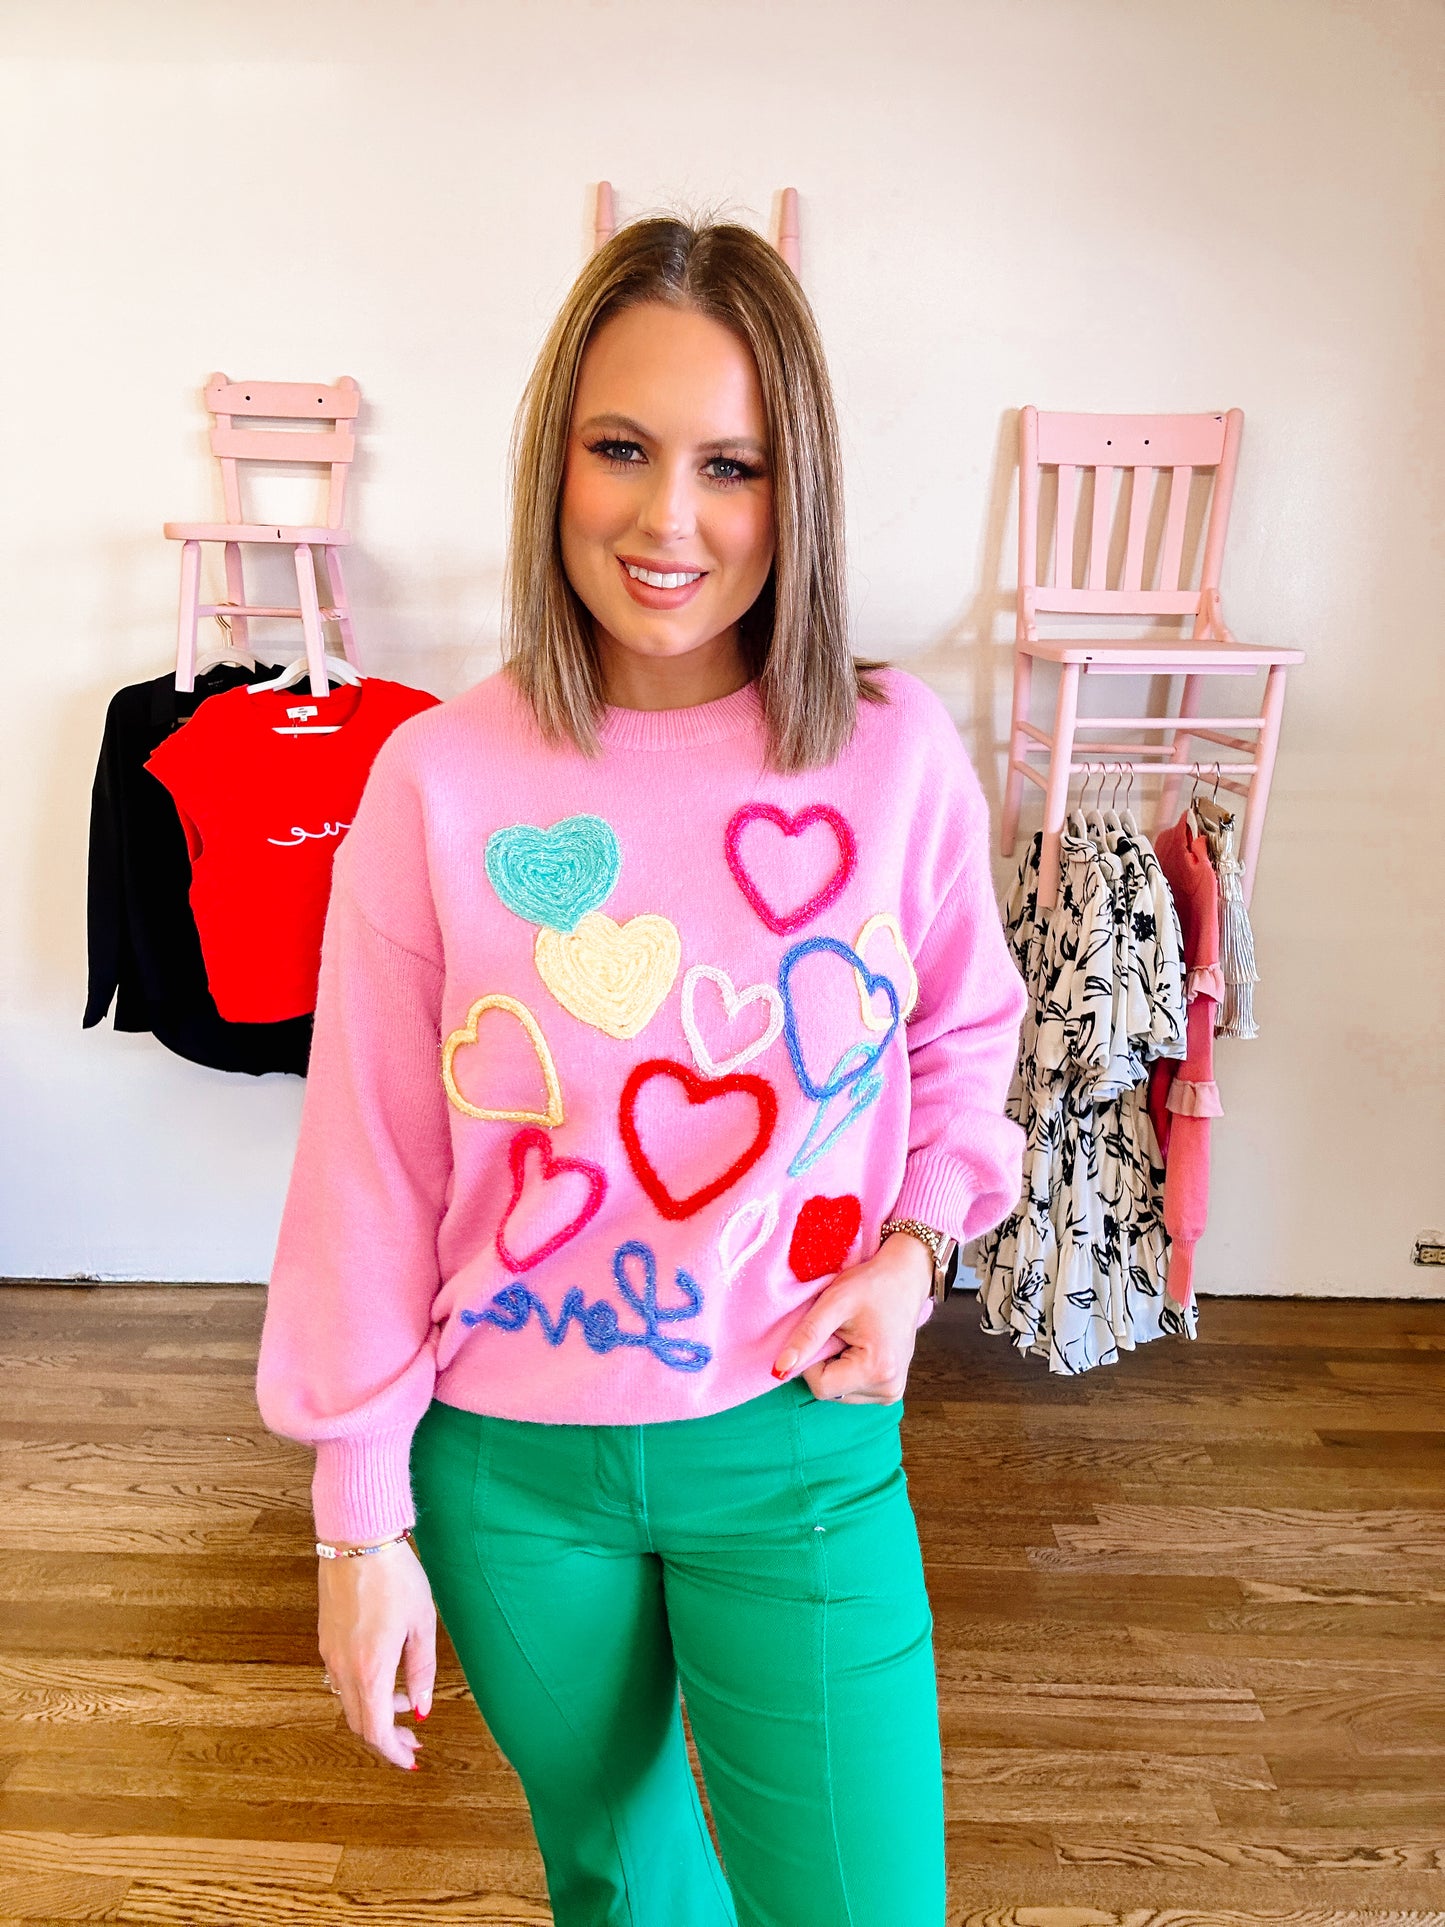 Lots of Love Multi Colored Heart Sweater